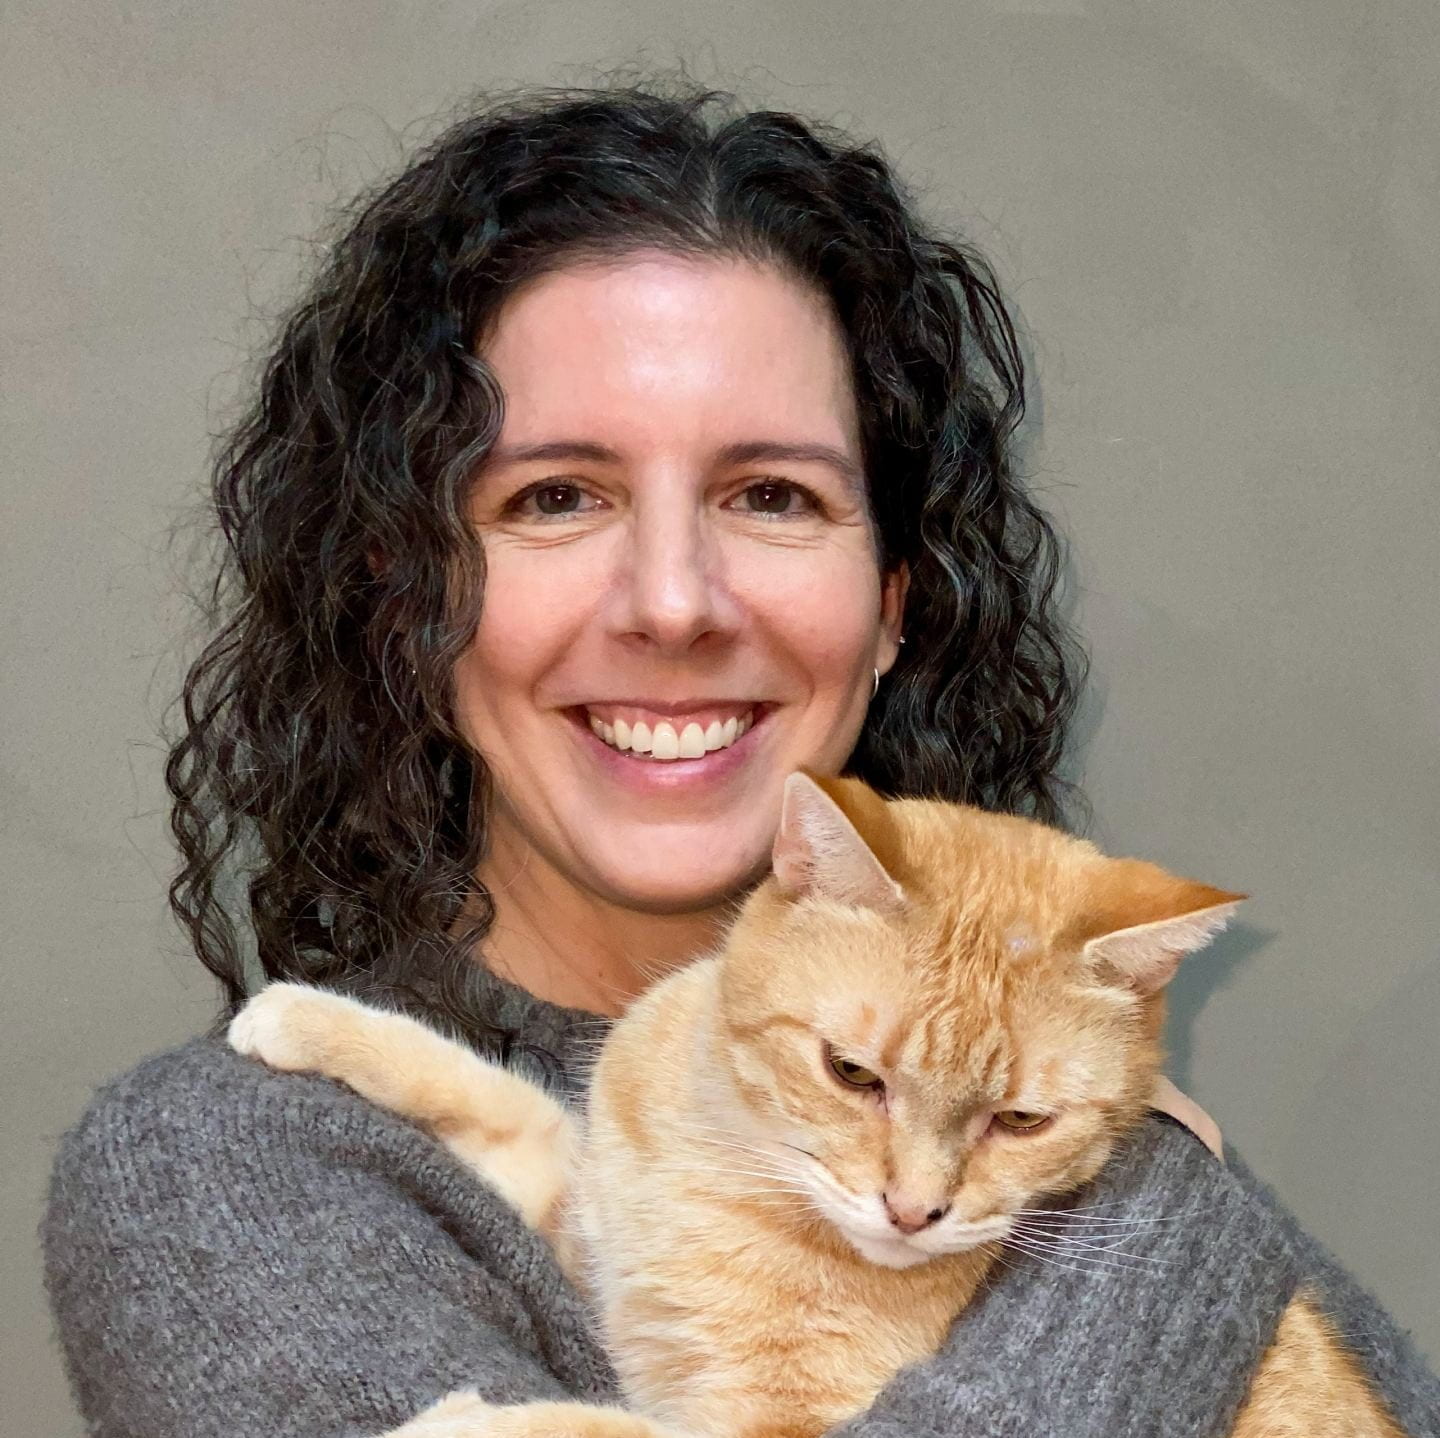 Dr. Lea Nogueira Borden with her cat.